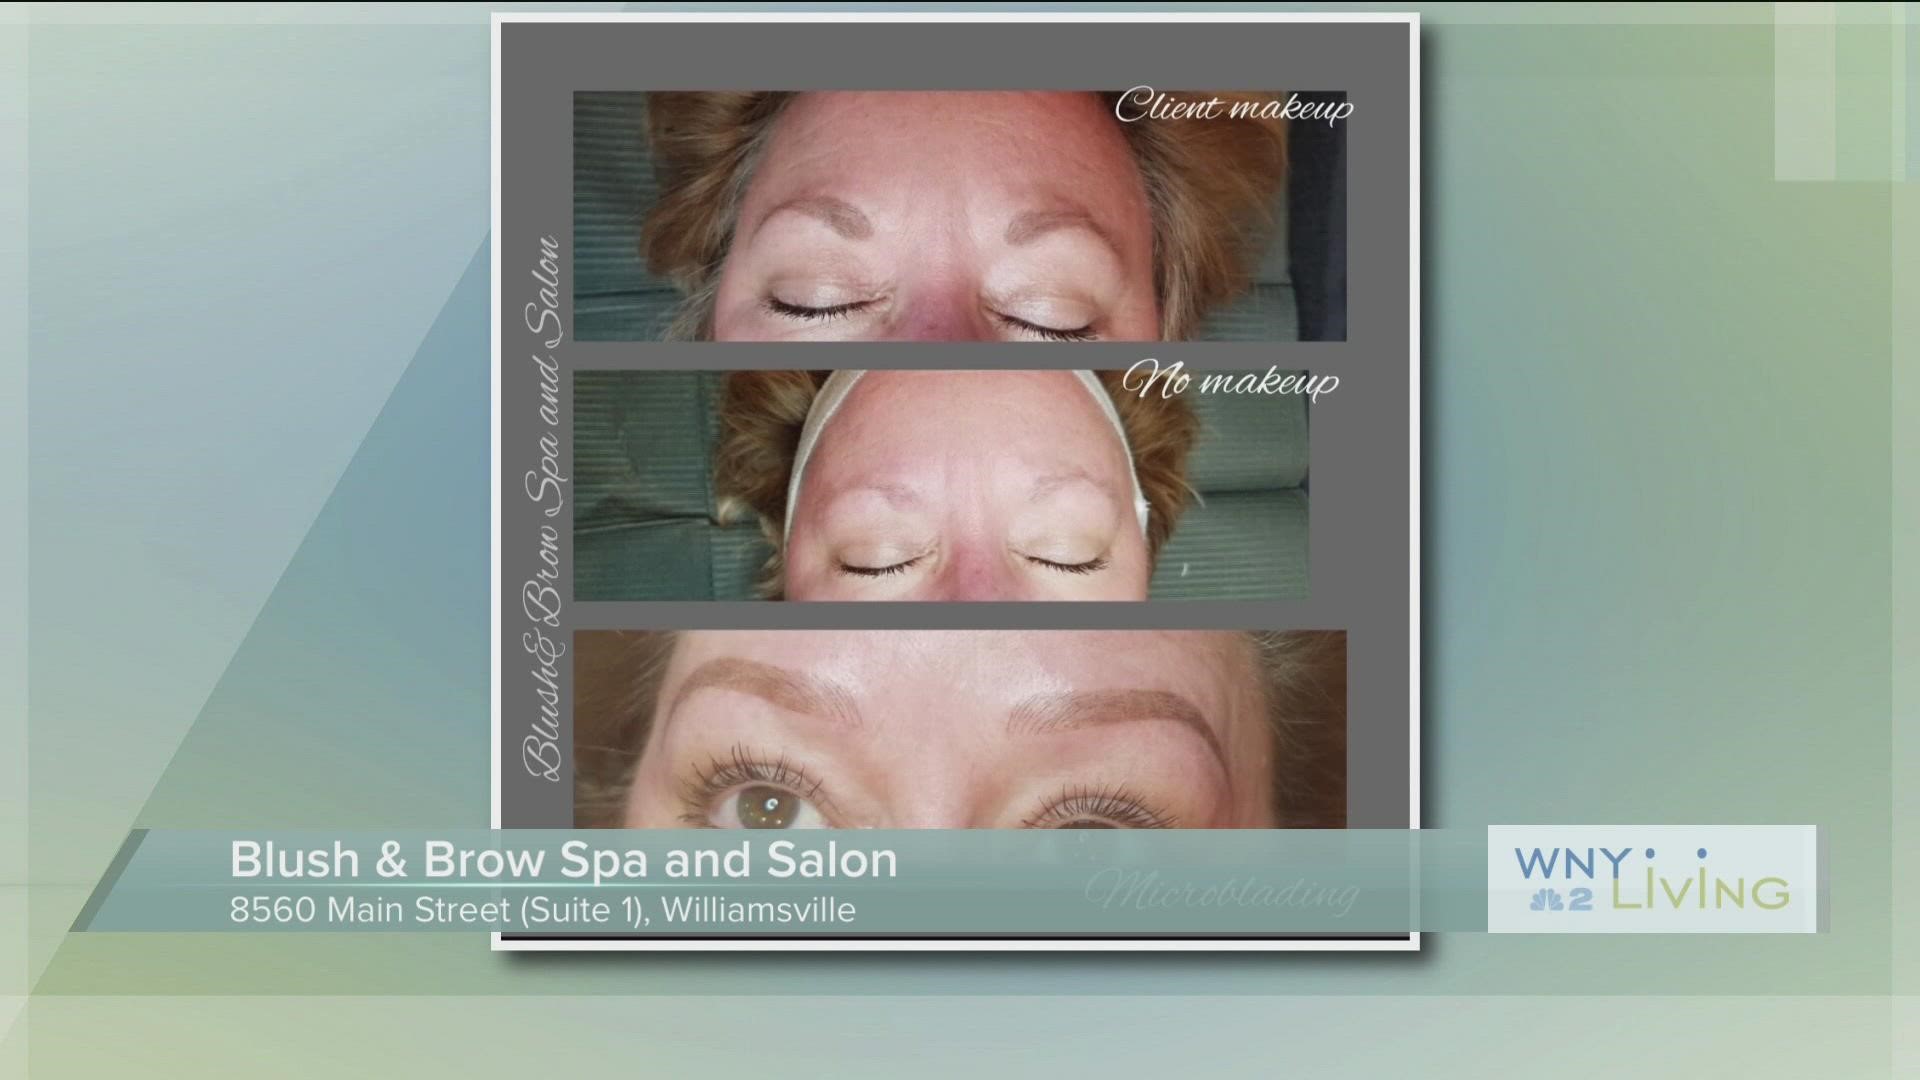 WNY Living - August 13 - Blush & Brow Spa (THIS VIDEO IS SPONSORED BY BLUSH & BROW SPA)